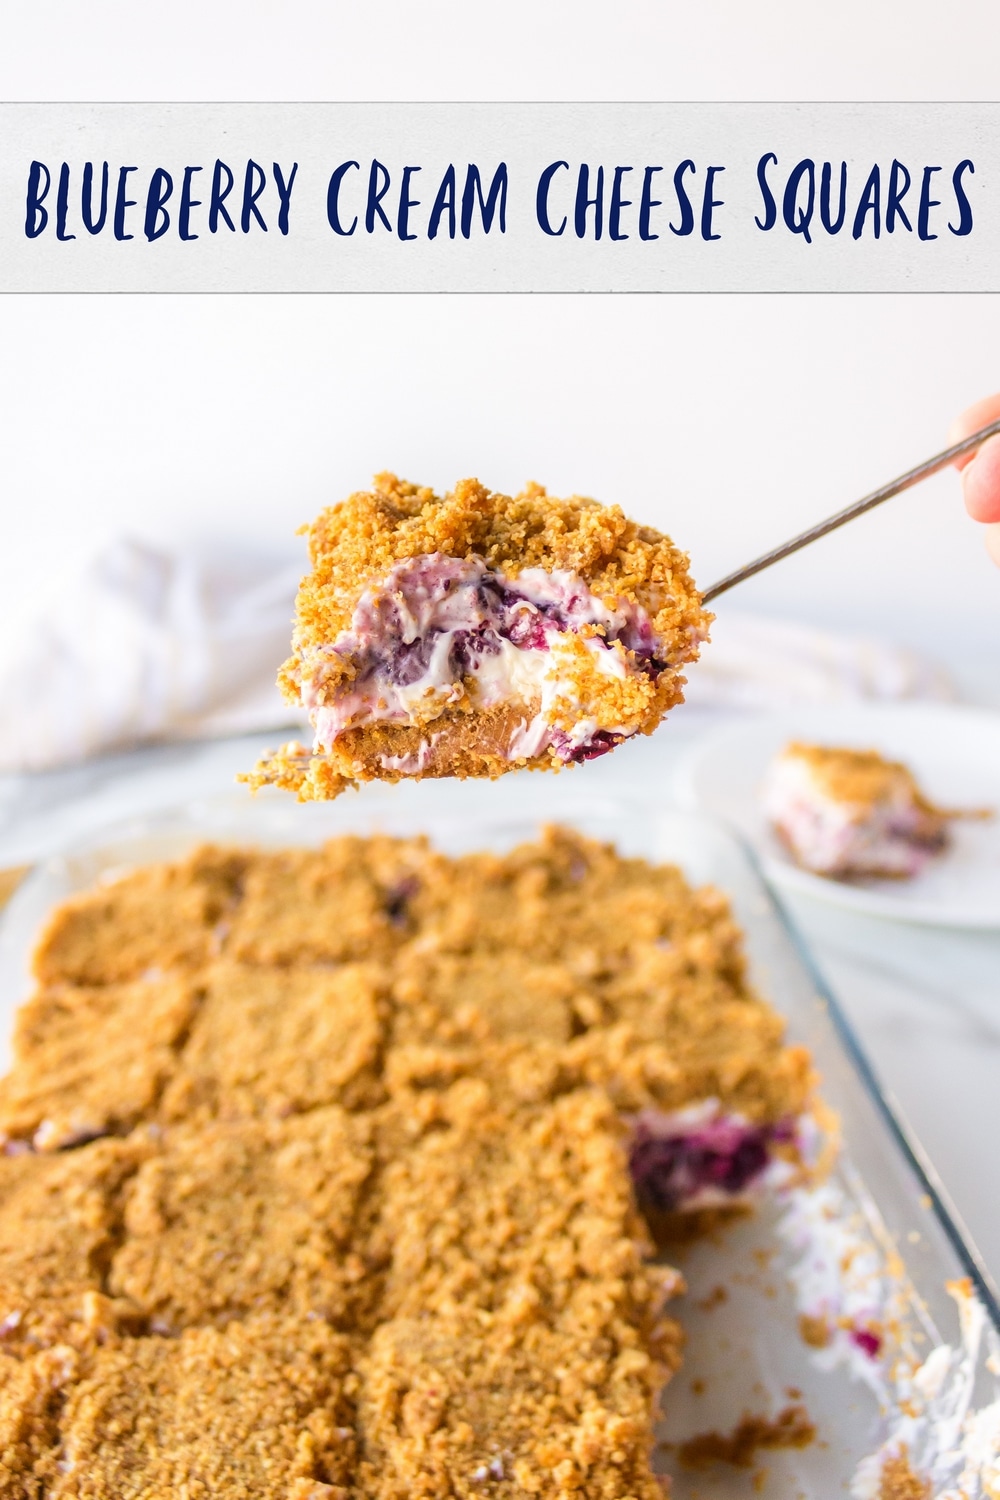 Blueberry bars with a cream cheese and whipped topping filling, sandwiched between two crunchy graham cracker layers. via @cmpollak1